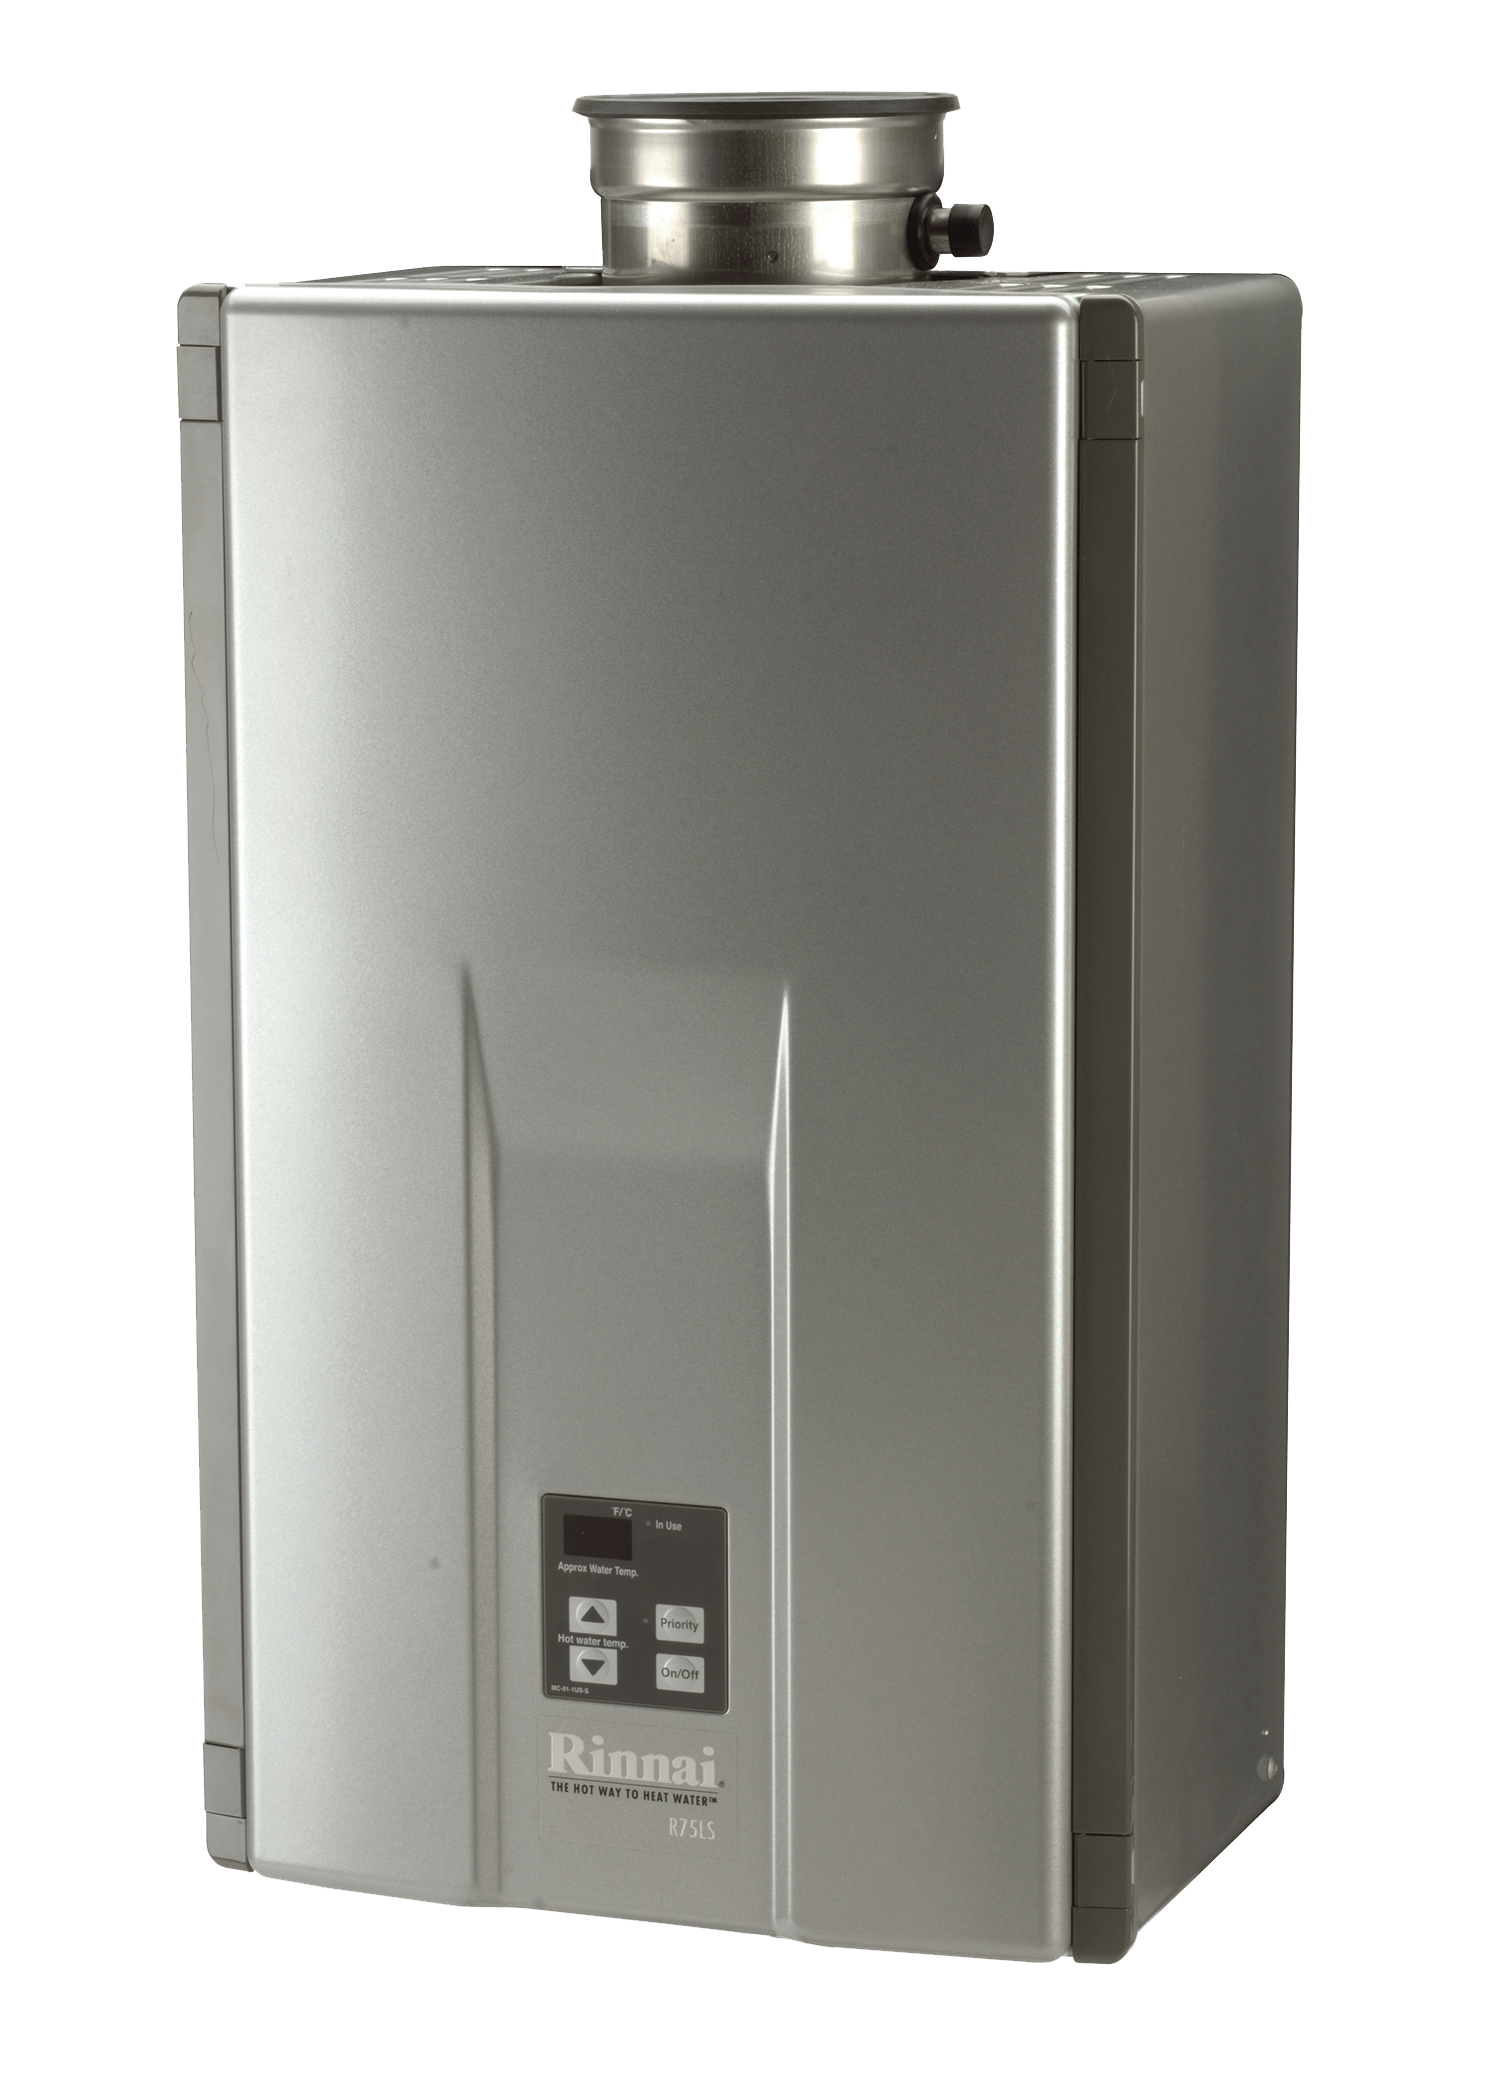 Download PNG image - Water Heater Transparent Images PNG 